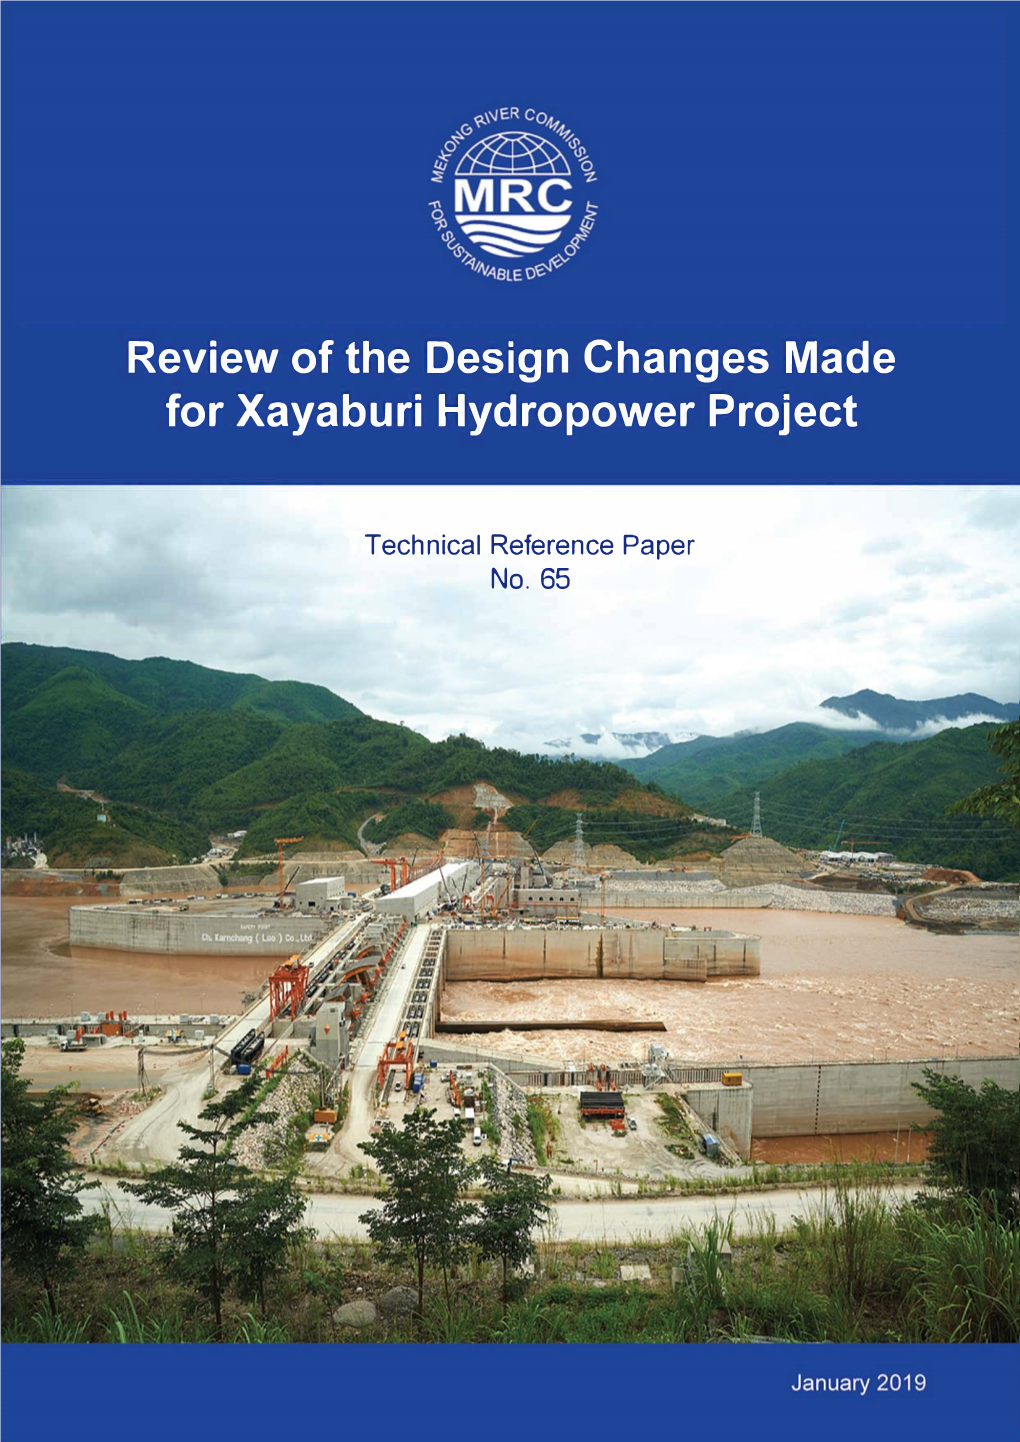 Review of the Design Changes Made for Xayaburi Hydropower Project